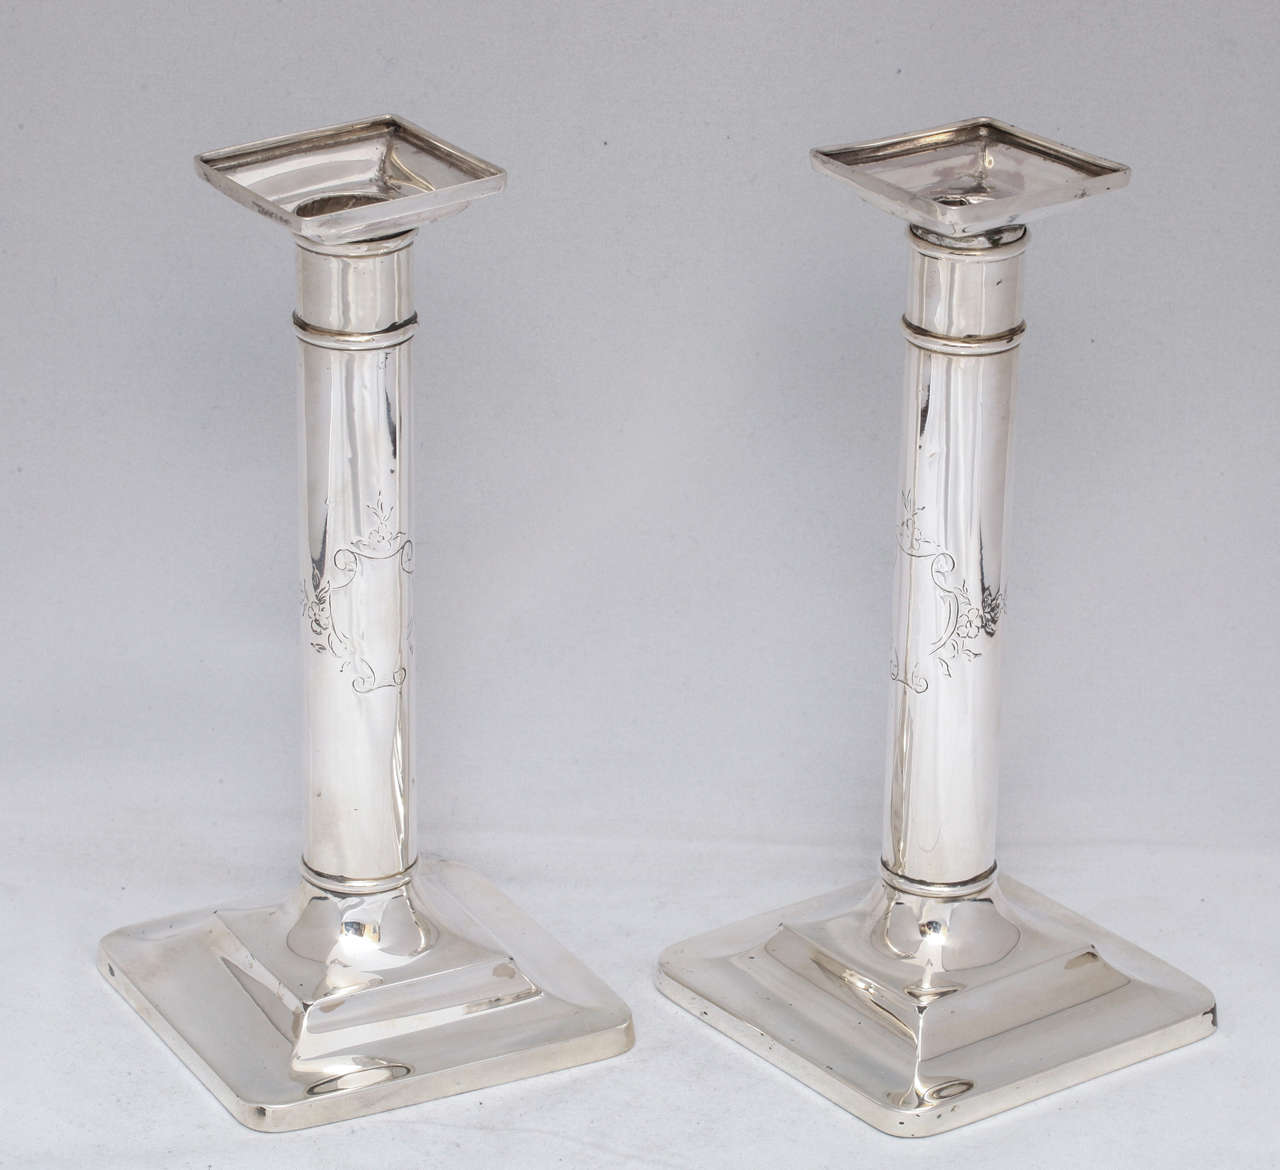 Lovely pair of sterling silver, column-form candlesticks with removable bobeches and vacant cartouches, Tiffany & Co, New York, year marked for 1903-1904. Measures: 8